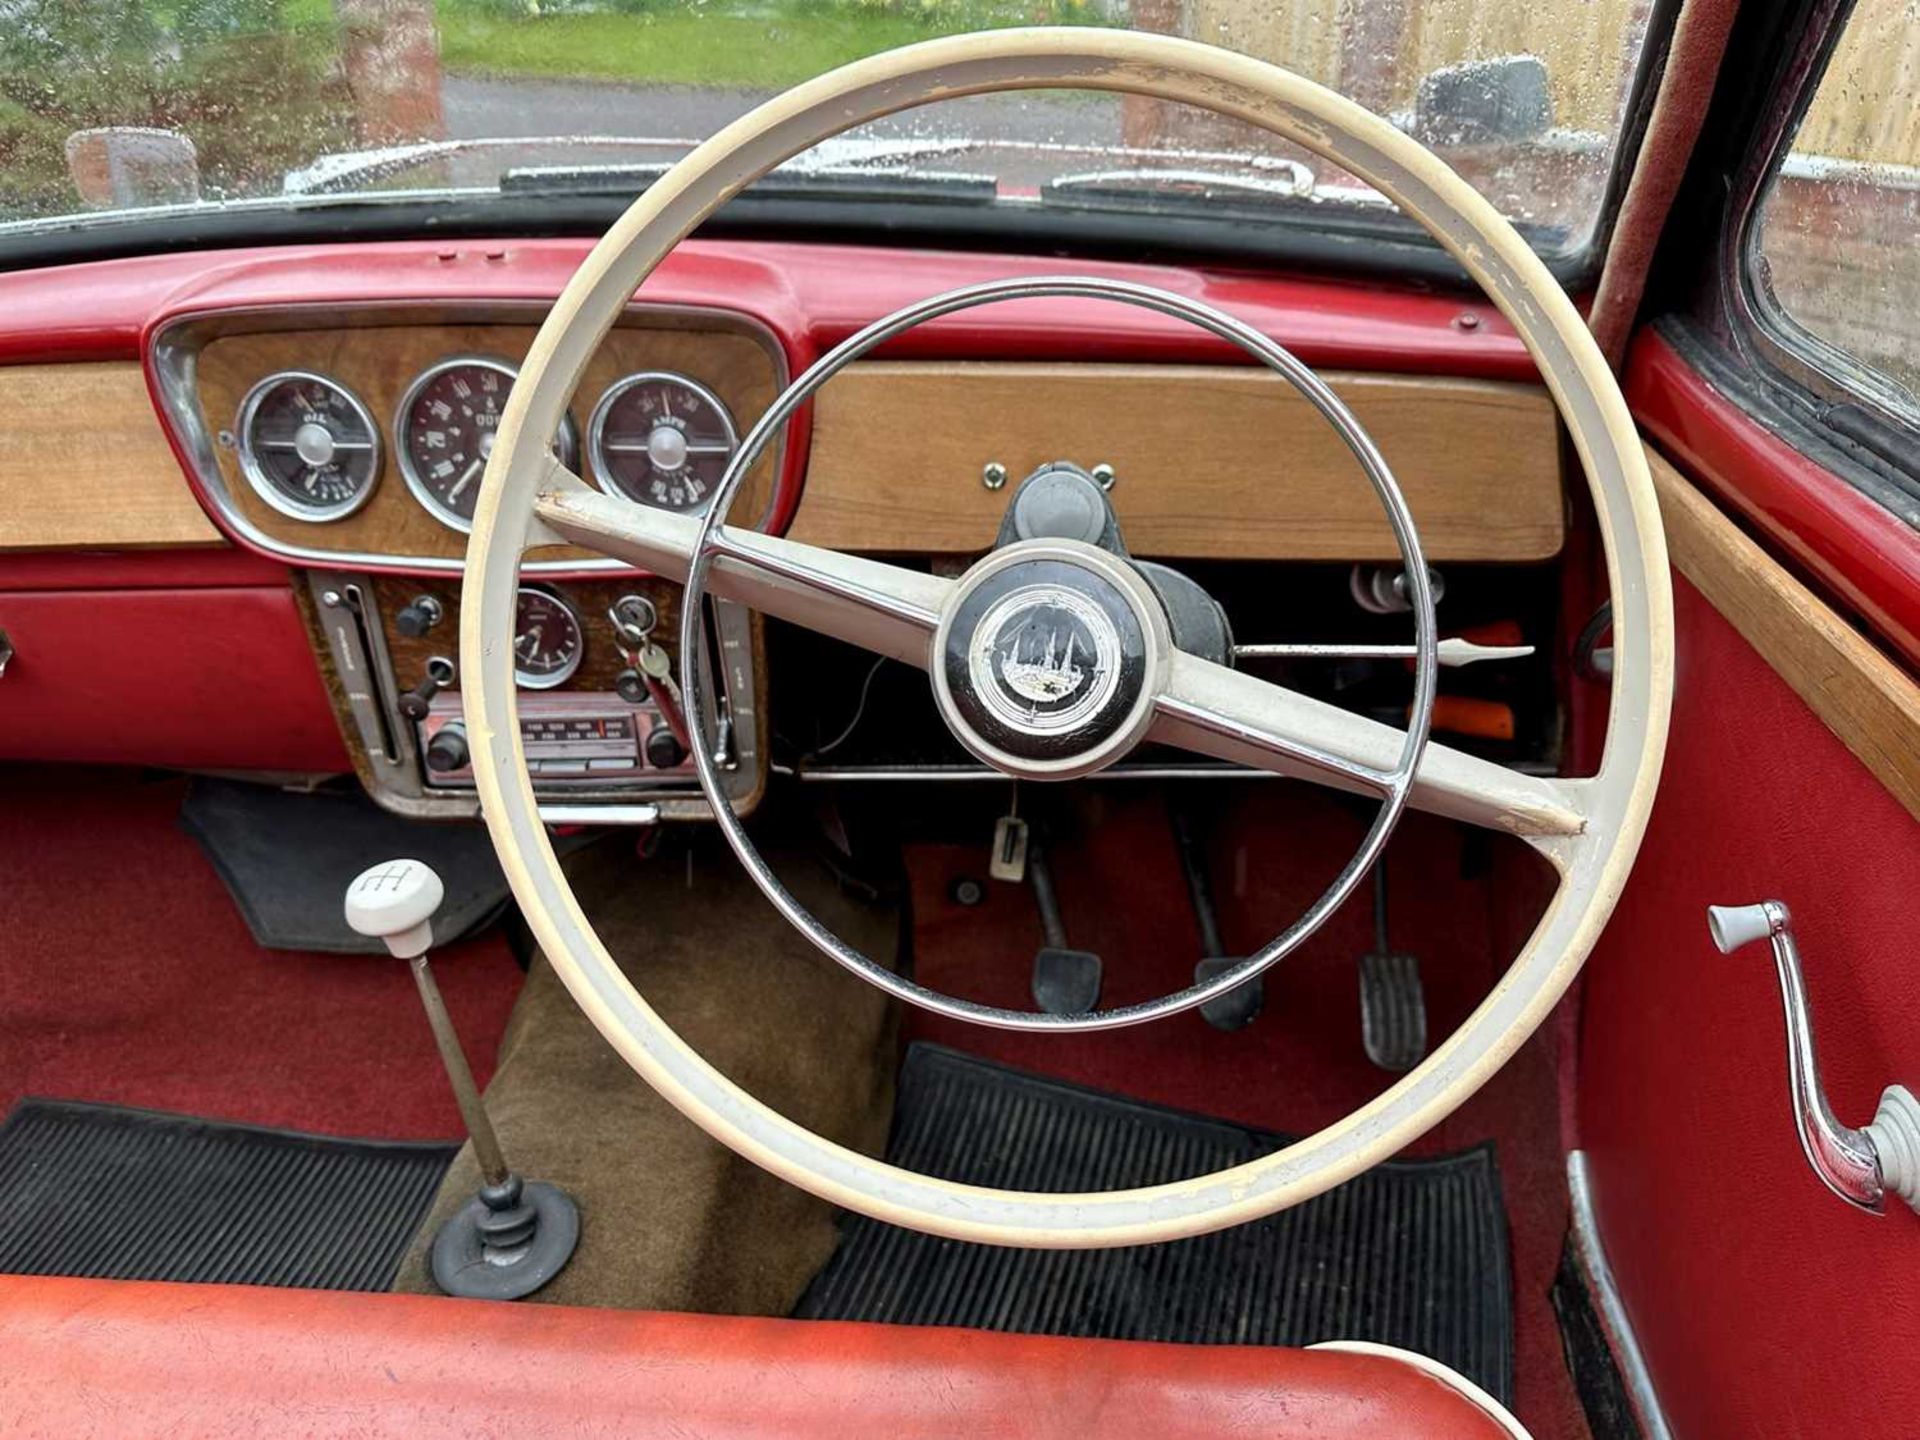 1961 Singer Gazelle Convertible Comes complete with overdrive, period radio and badge bar - Image 61 of 95